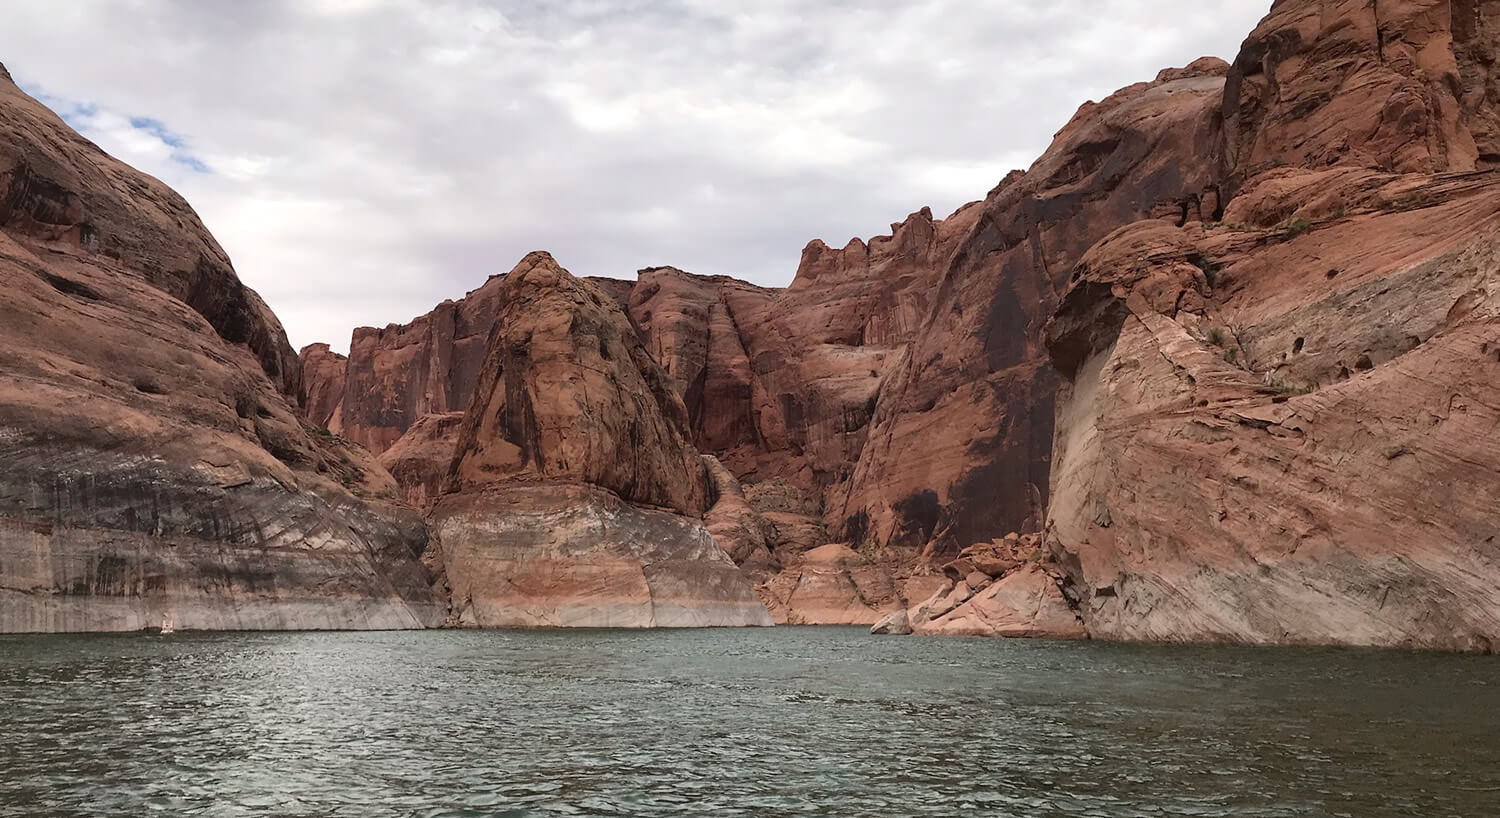 Red rock formations with water markings surrounding peaceful cove.